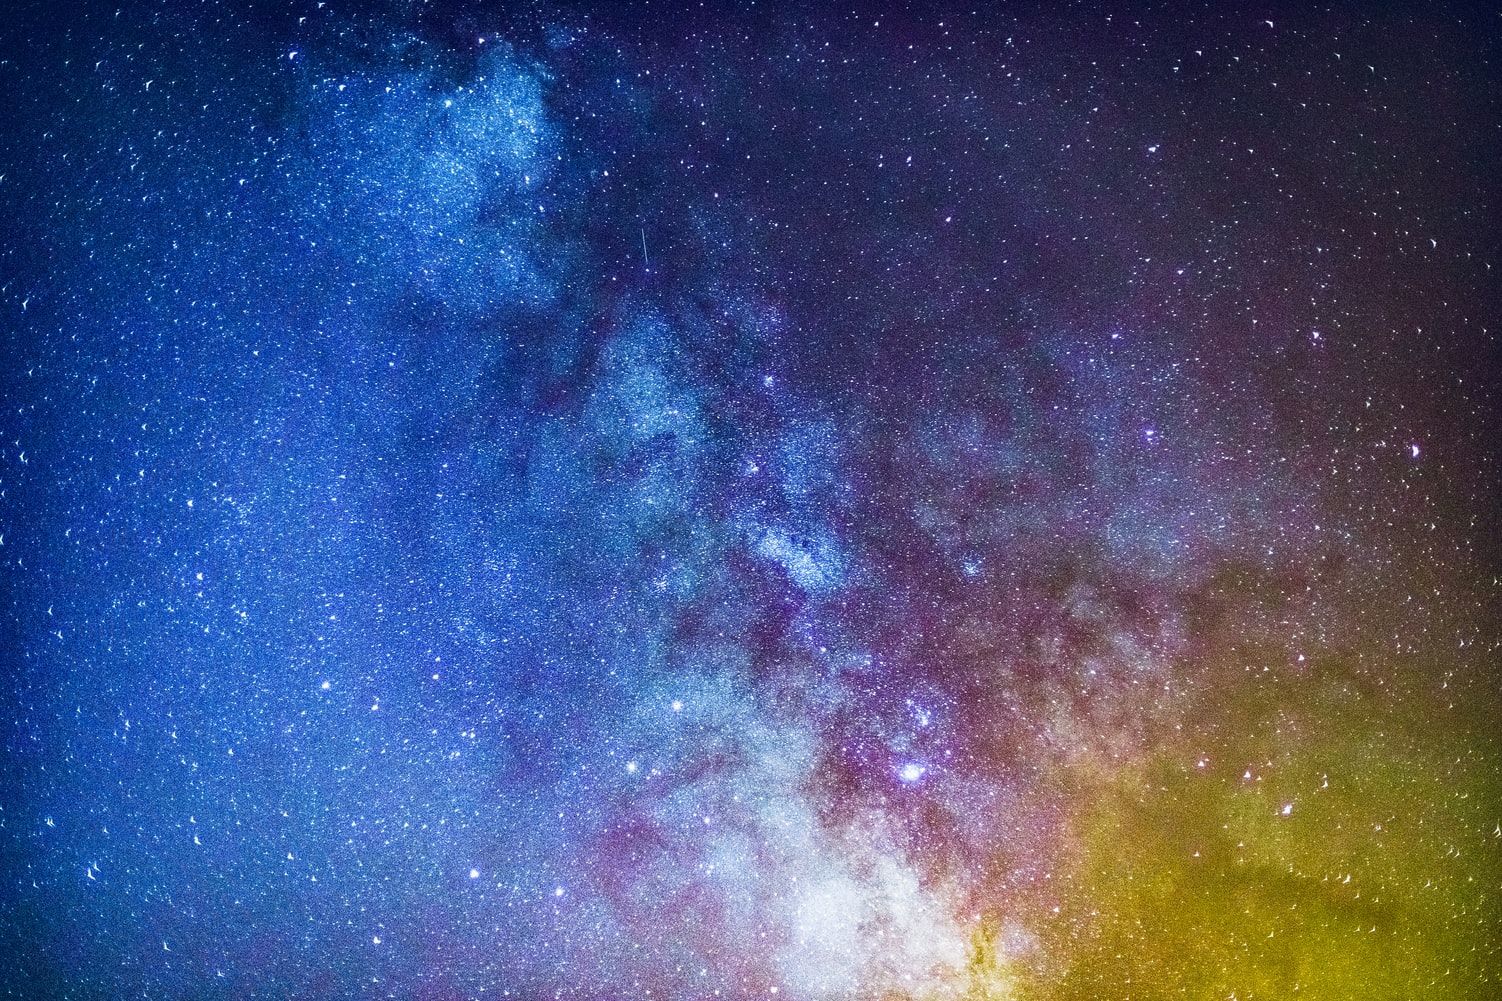 NASA releases ‘cosmic rose’ visuals, and the Internet is loving it